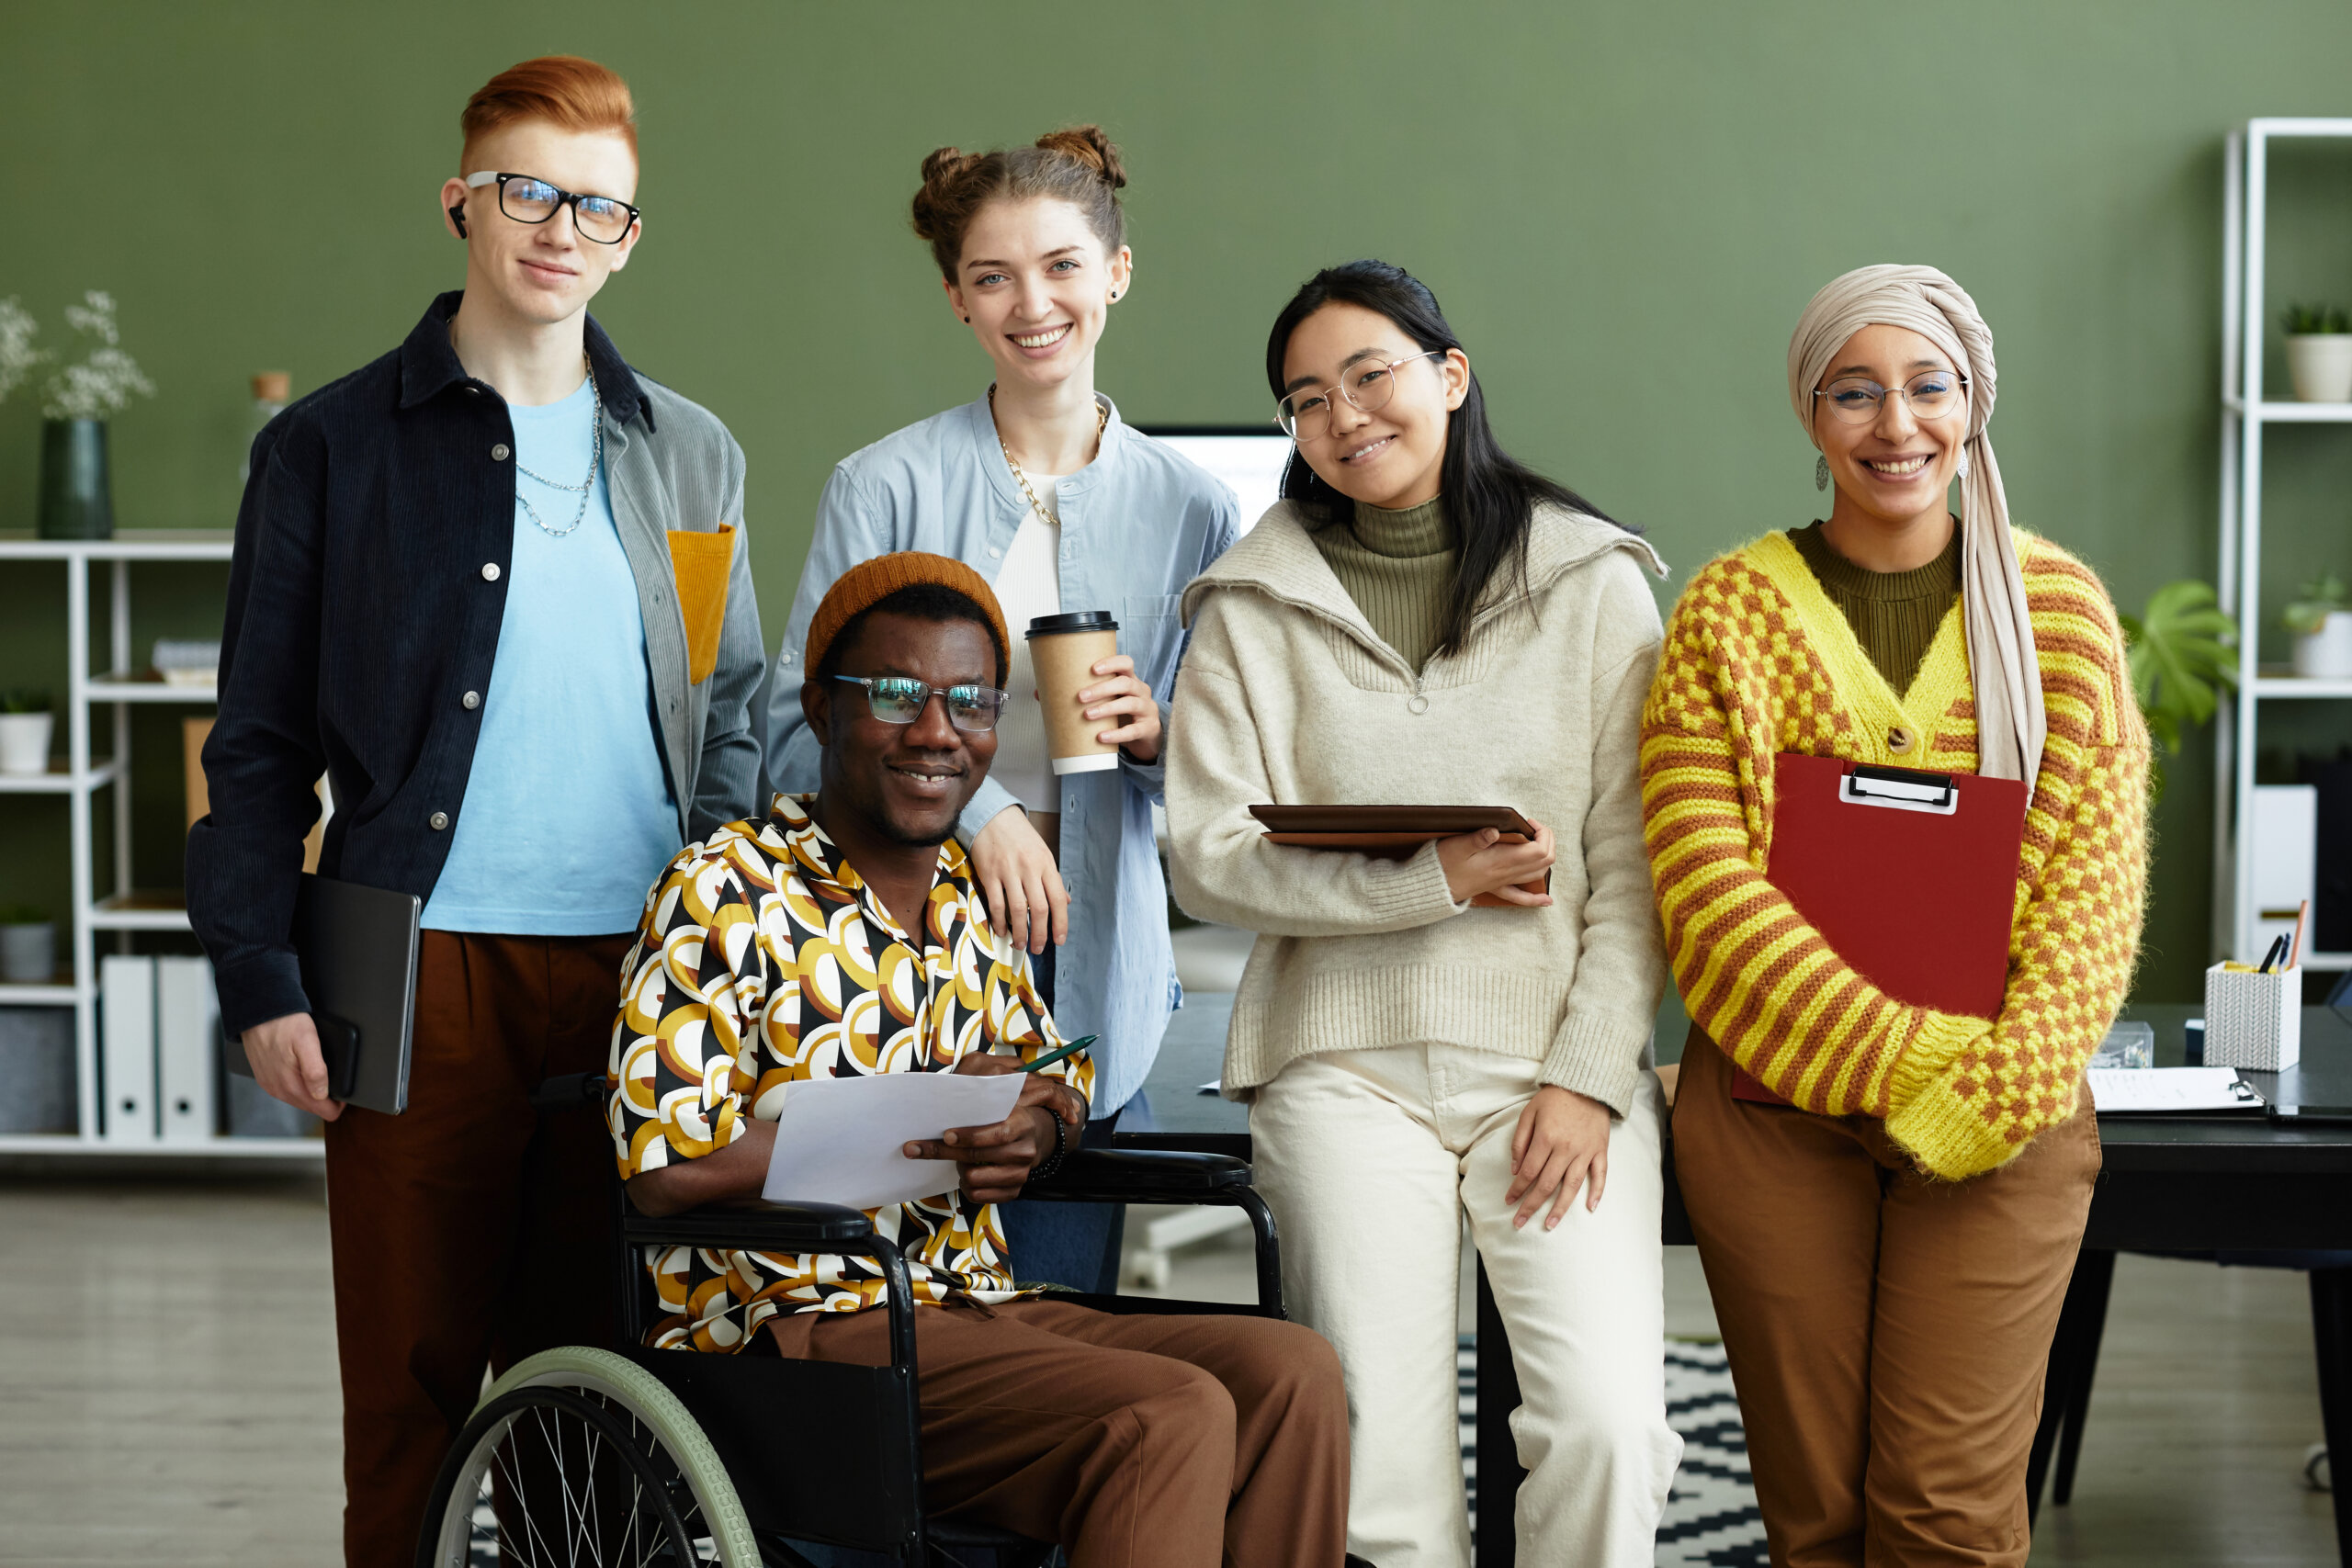 Portrait of diverse students looking at camera with cheerful smiles while posing in school, wheelchair user inclusion